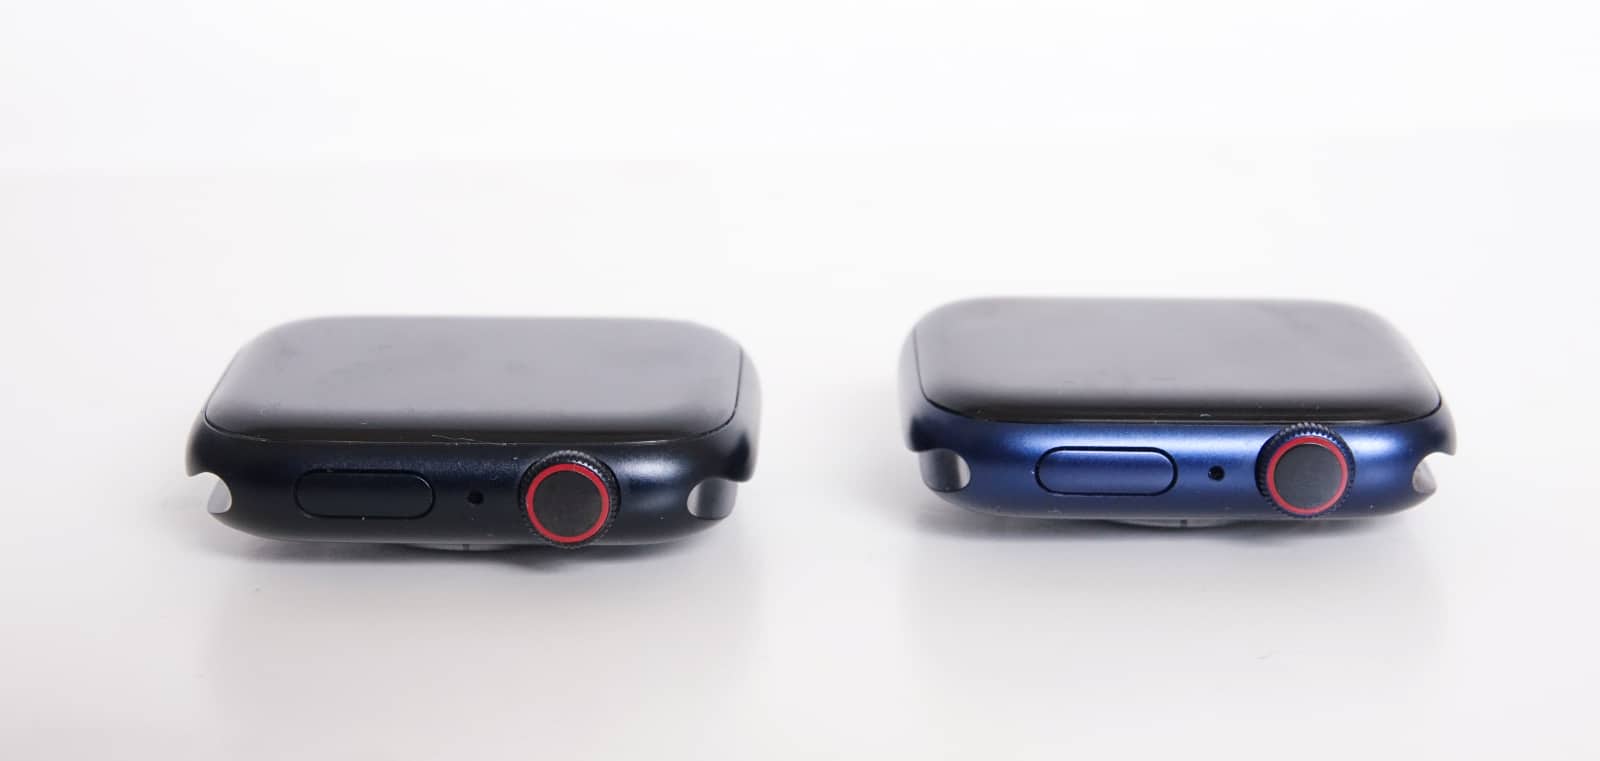 The difference of the Apple Watch Series 7 in midnight (left) versus the blue of the Series 6 (right).